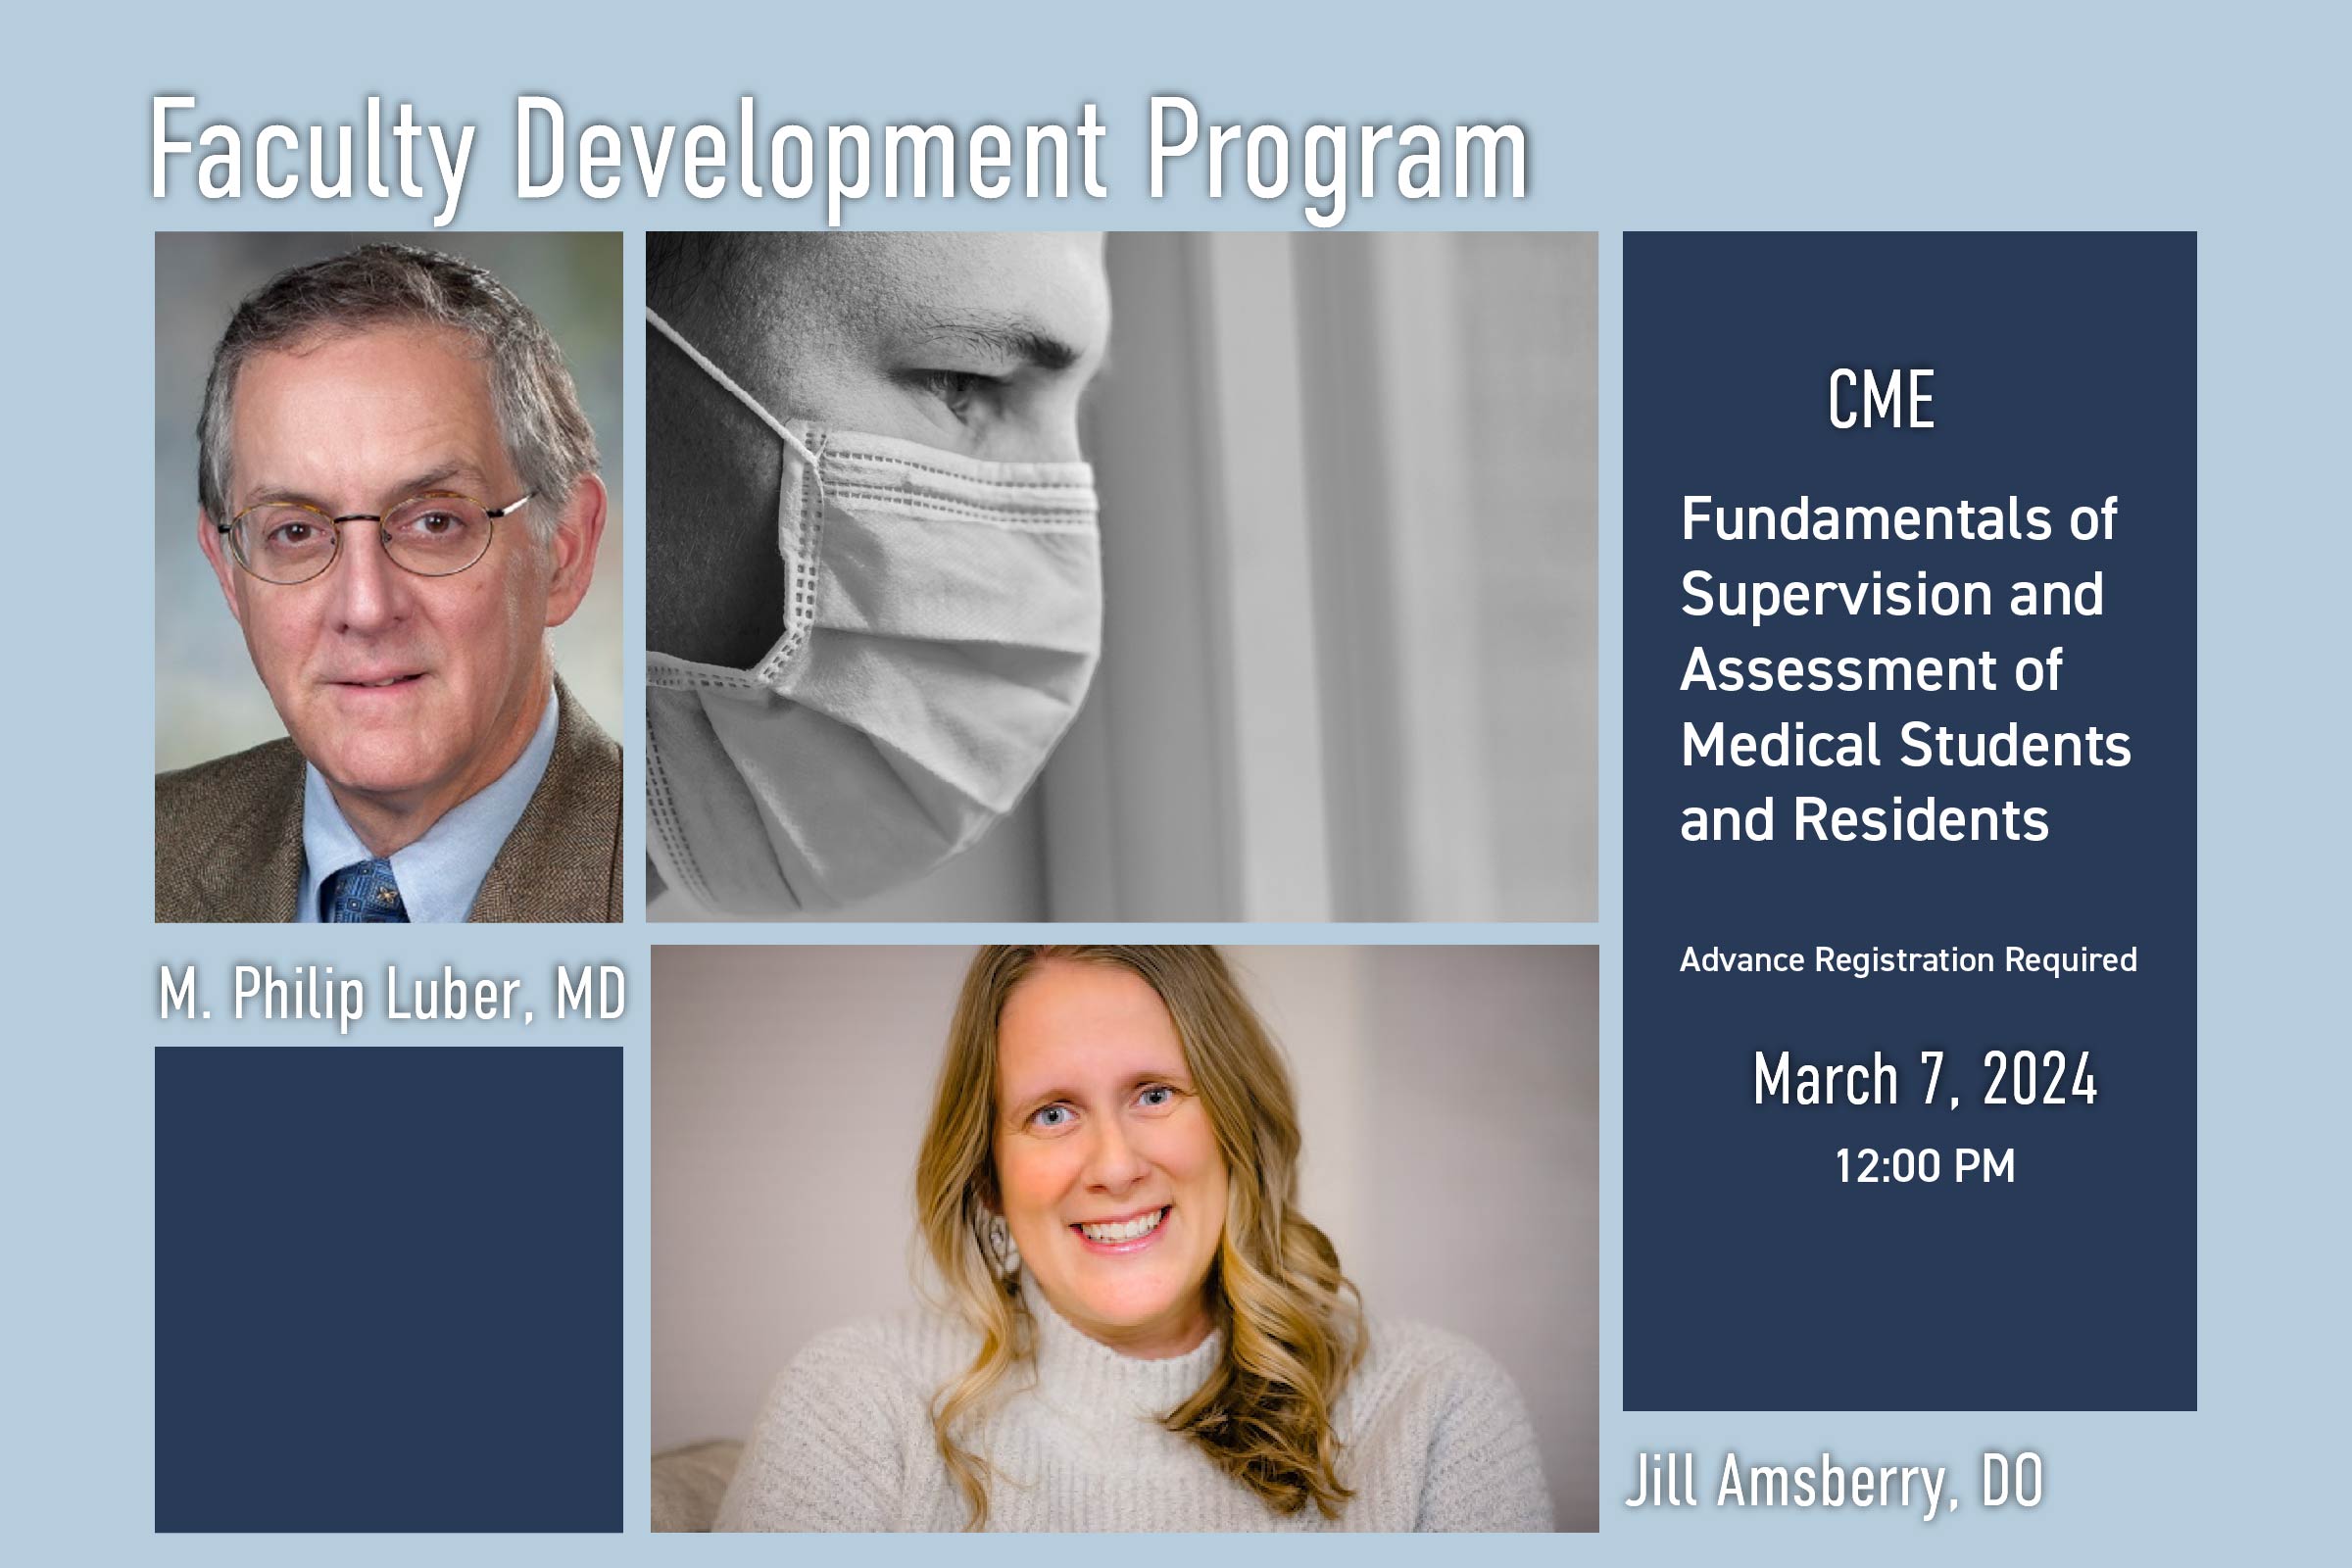 Promotion for the March 7th CME on Faculty Development for the Med School